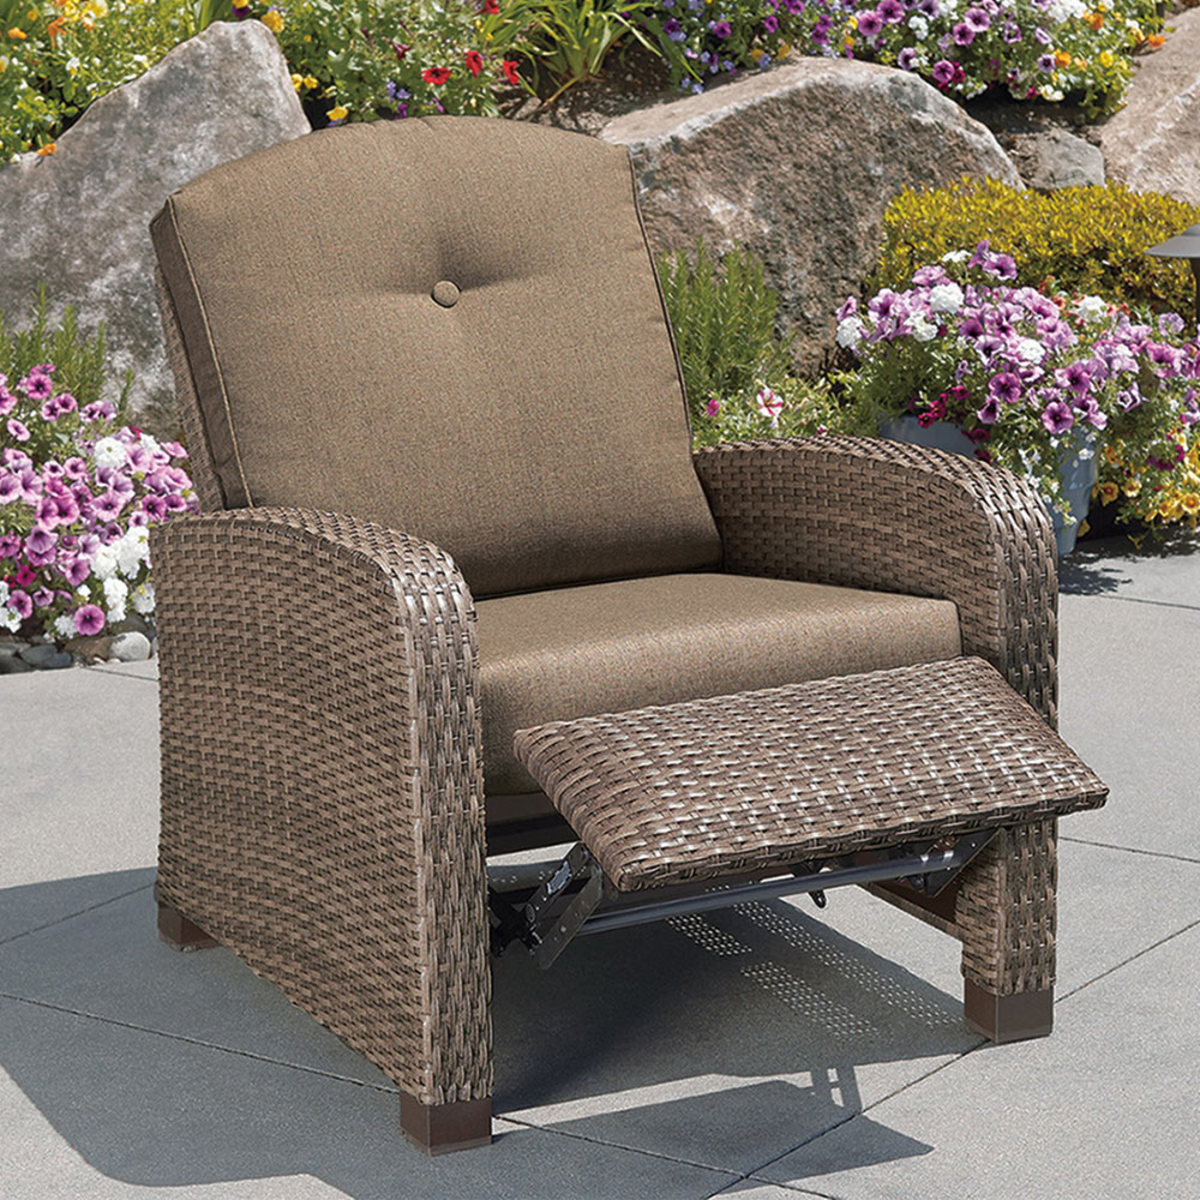 Barcalounger 6 Piece Fully Woven Recliner Seating Set | Costco UK